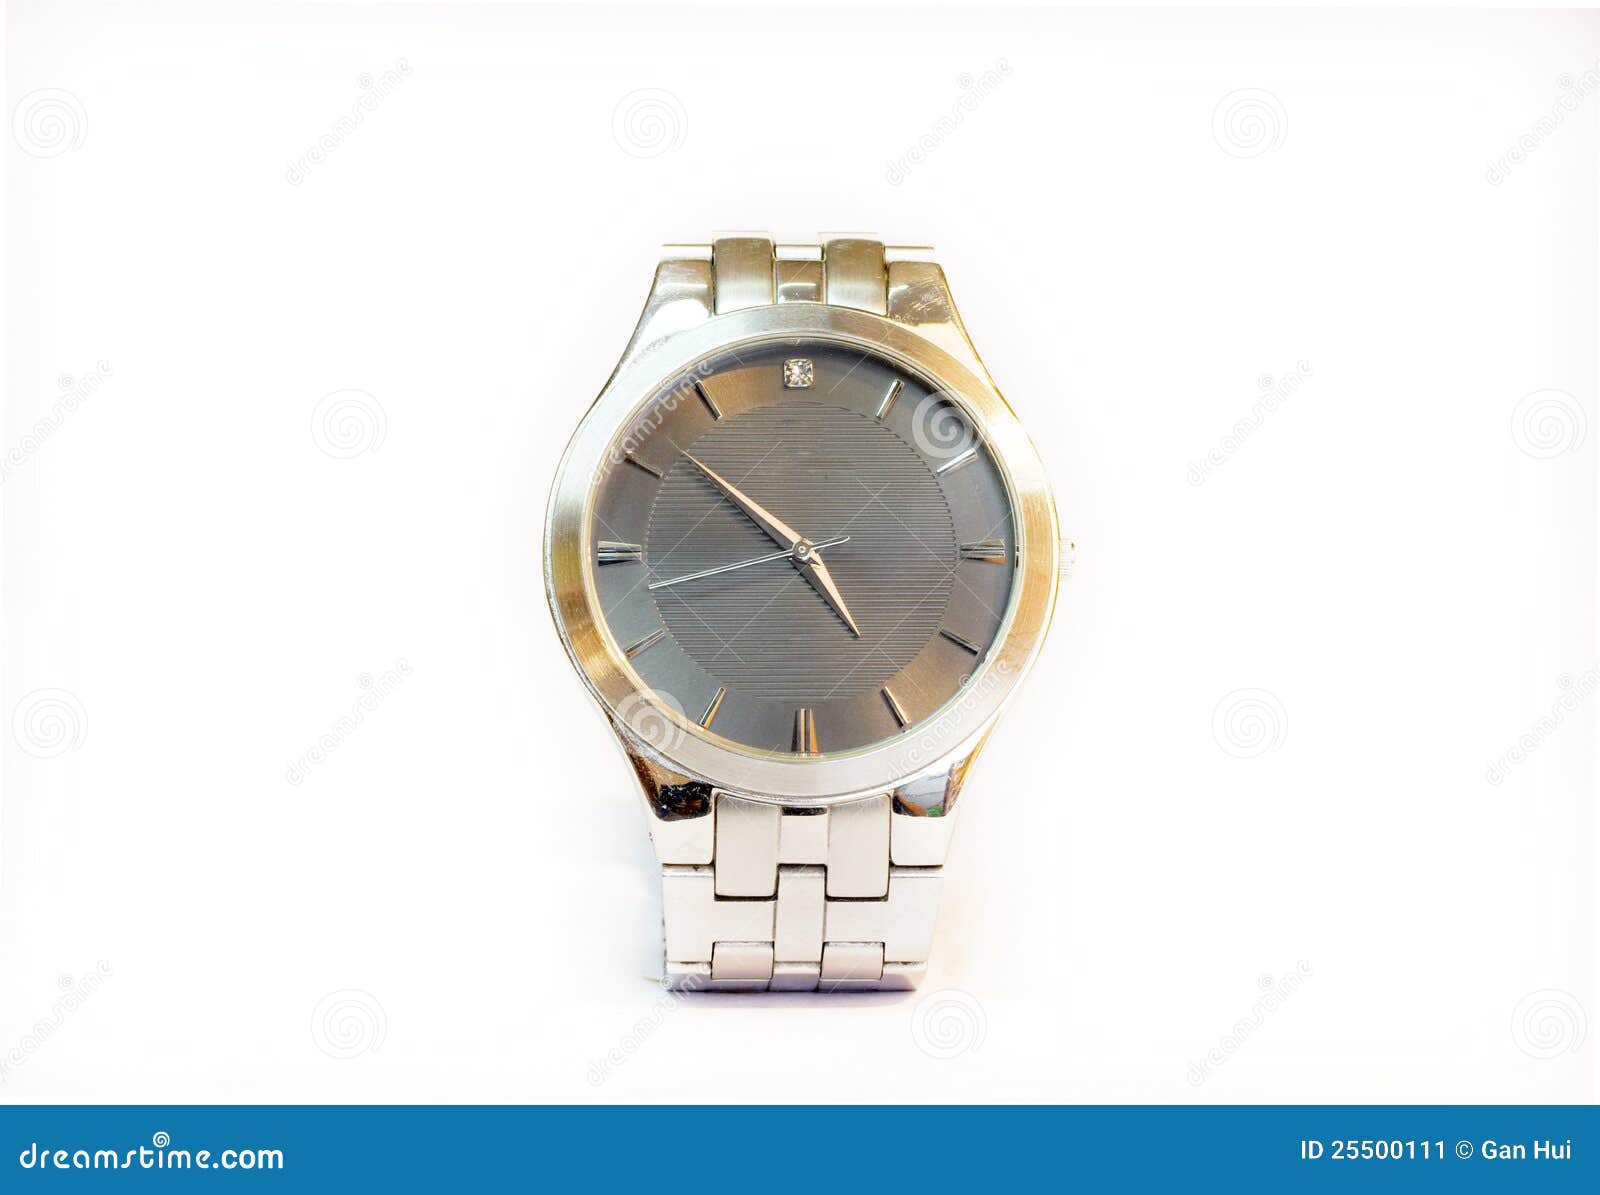 Watch In On White Background Stock Image - Image of change, absence ...